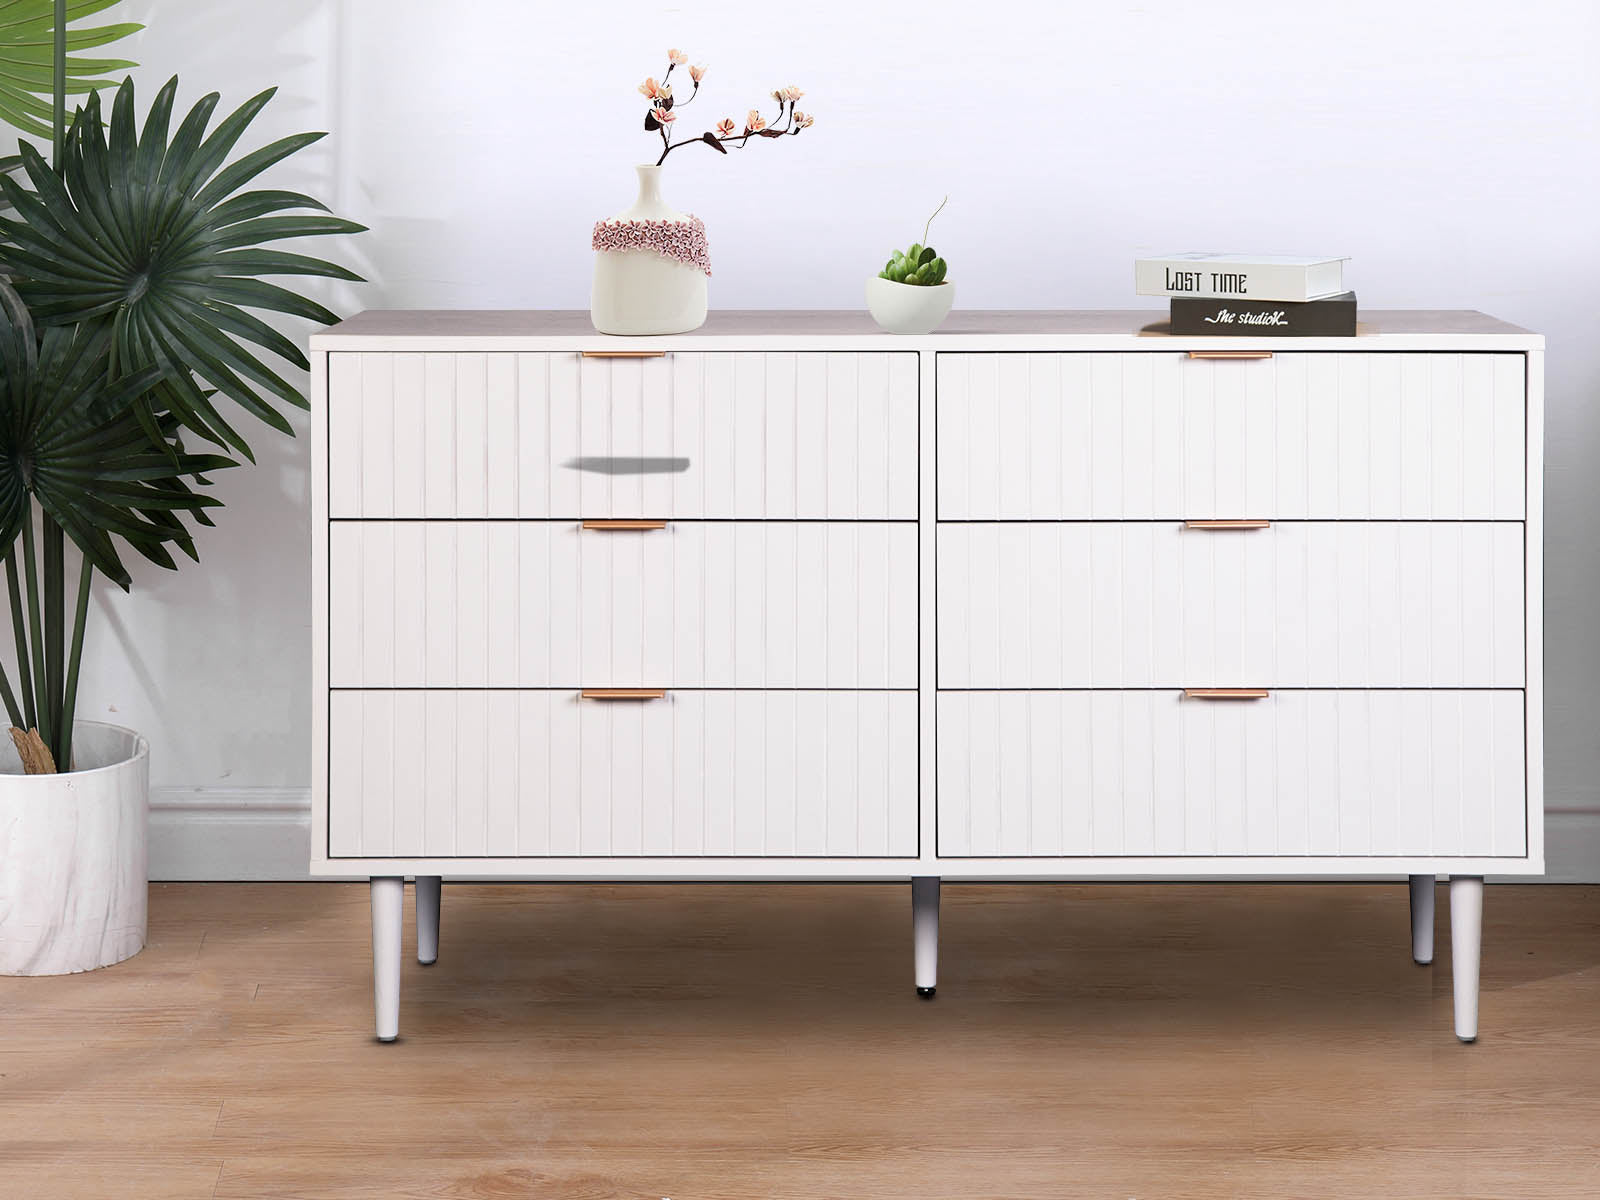 Swansea Chest of Drawers